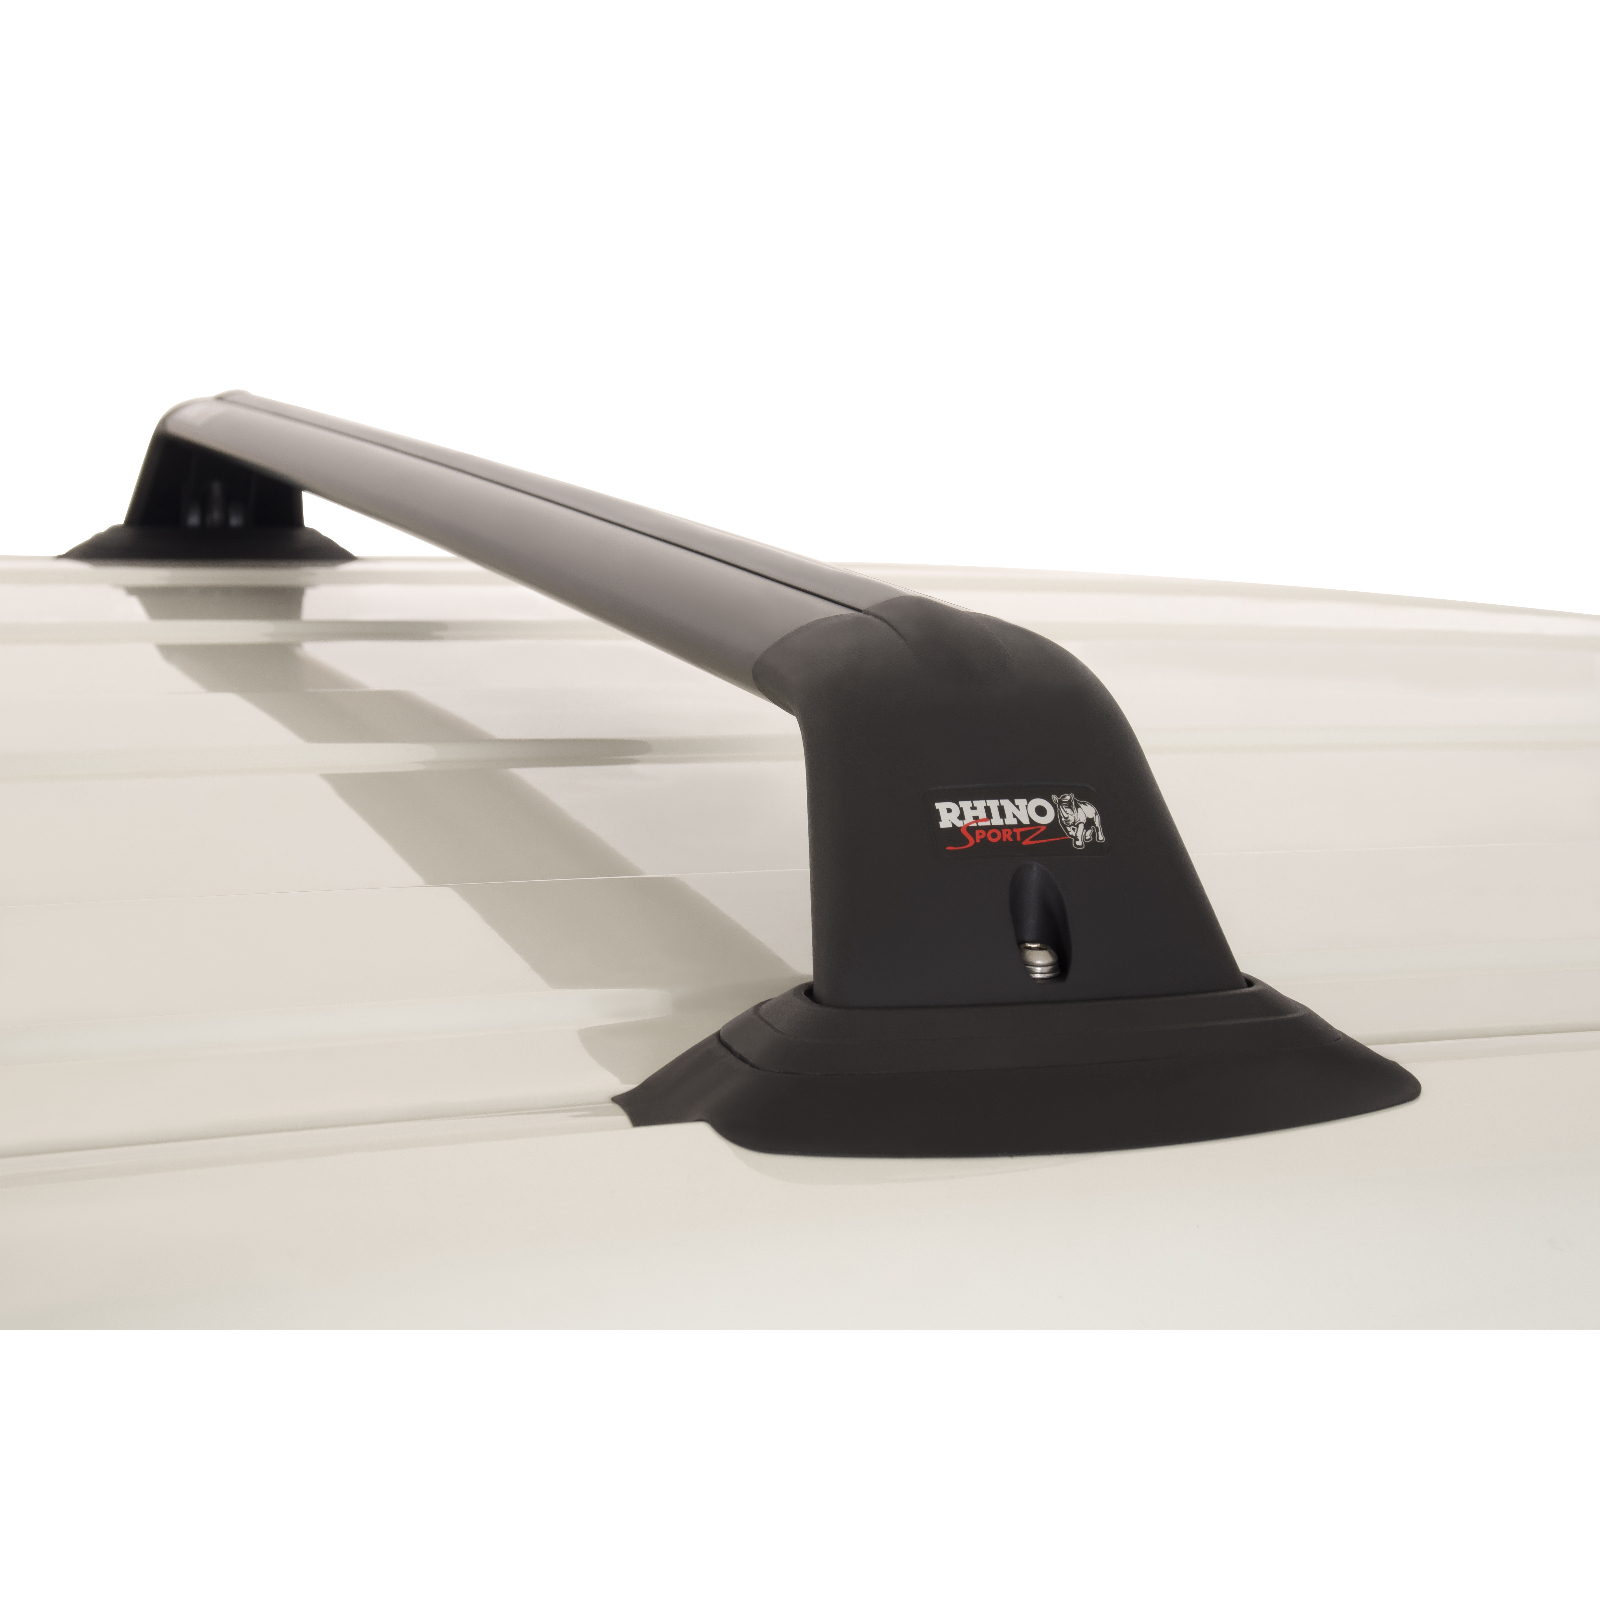 RSF Series Cap / Topper Fixed Mount Roof Rack System